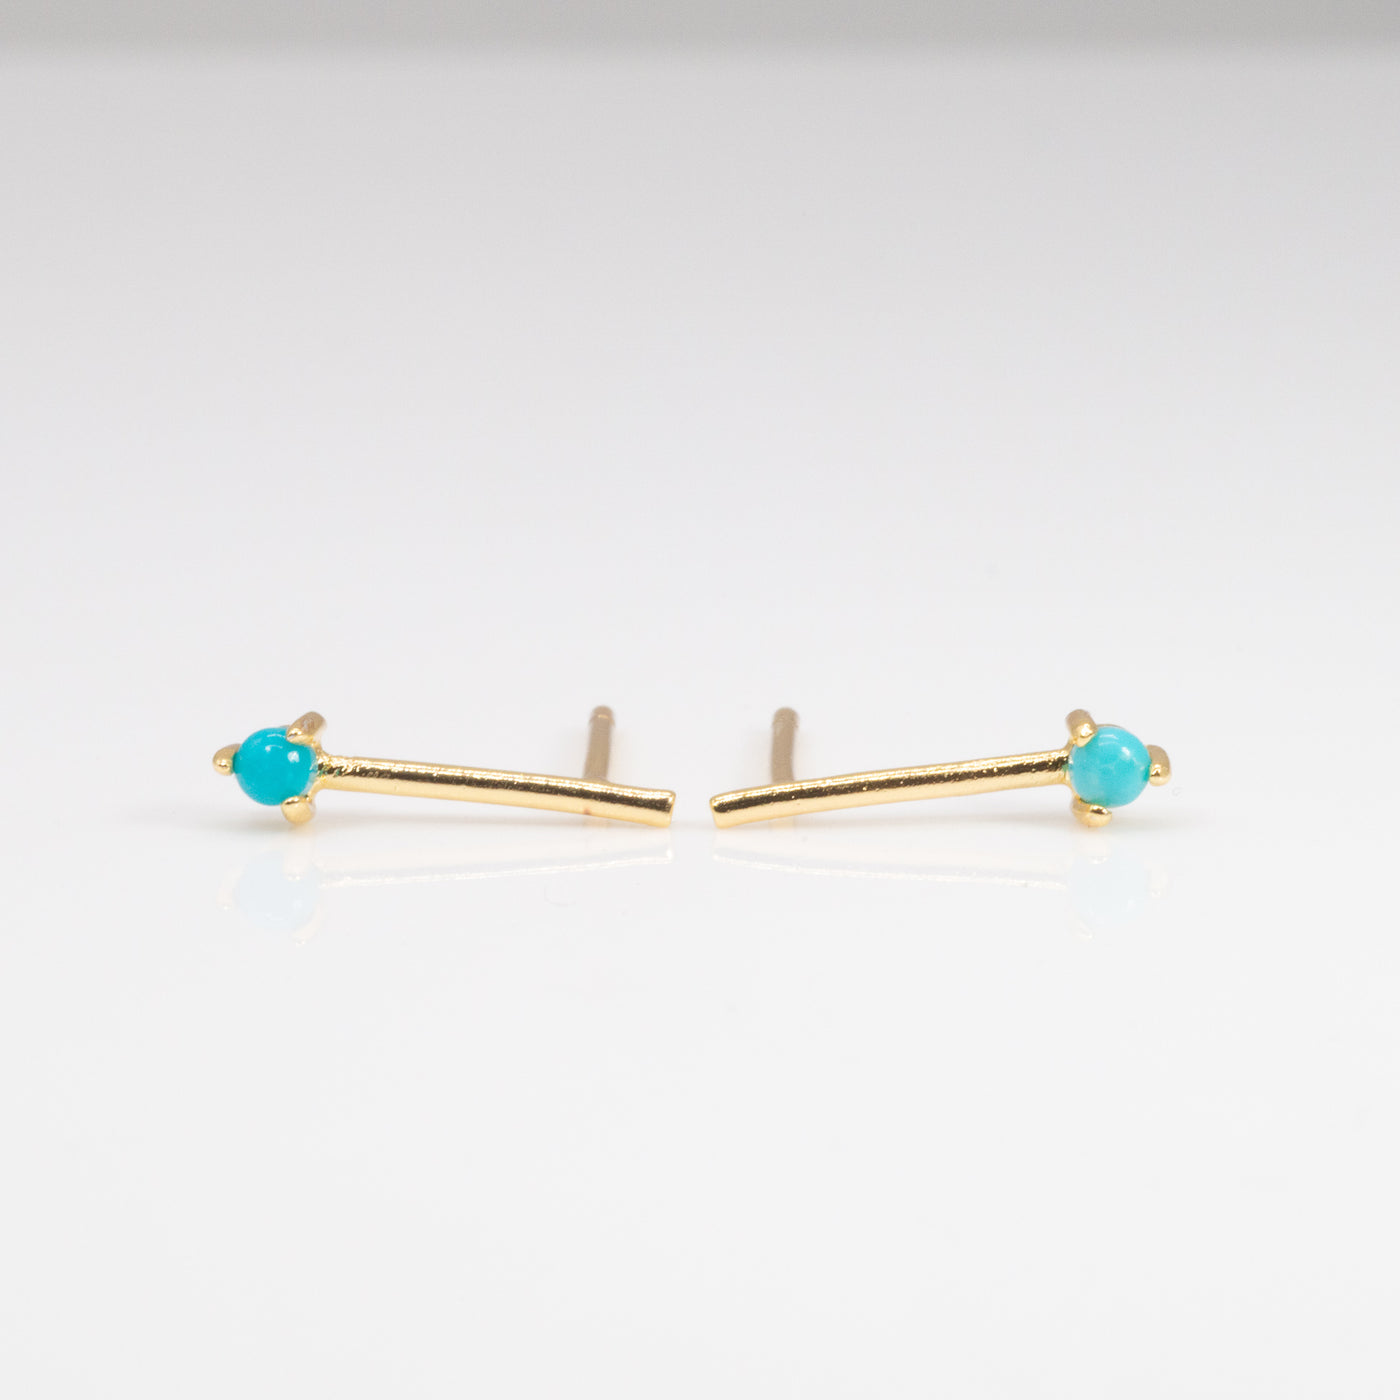 Prong Bar Studs - Turquoise